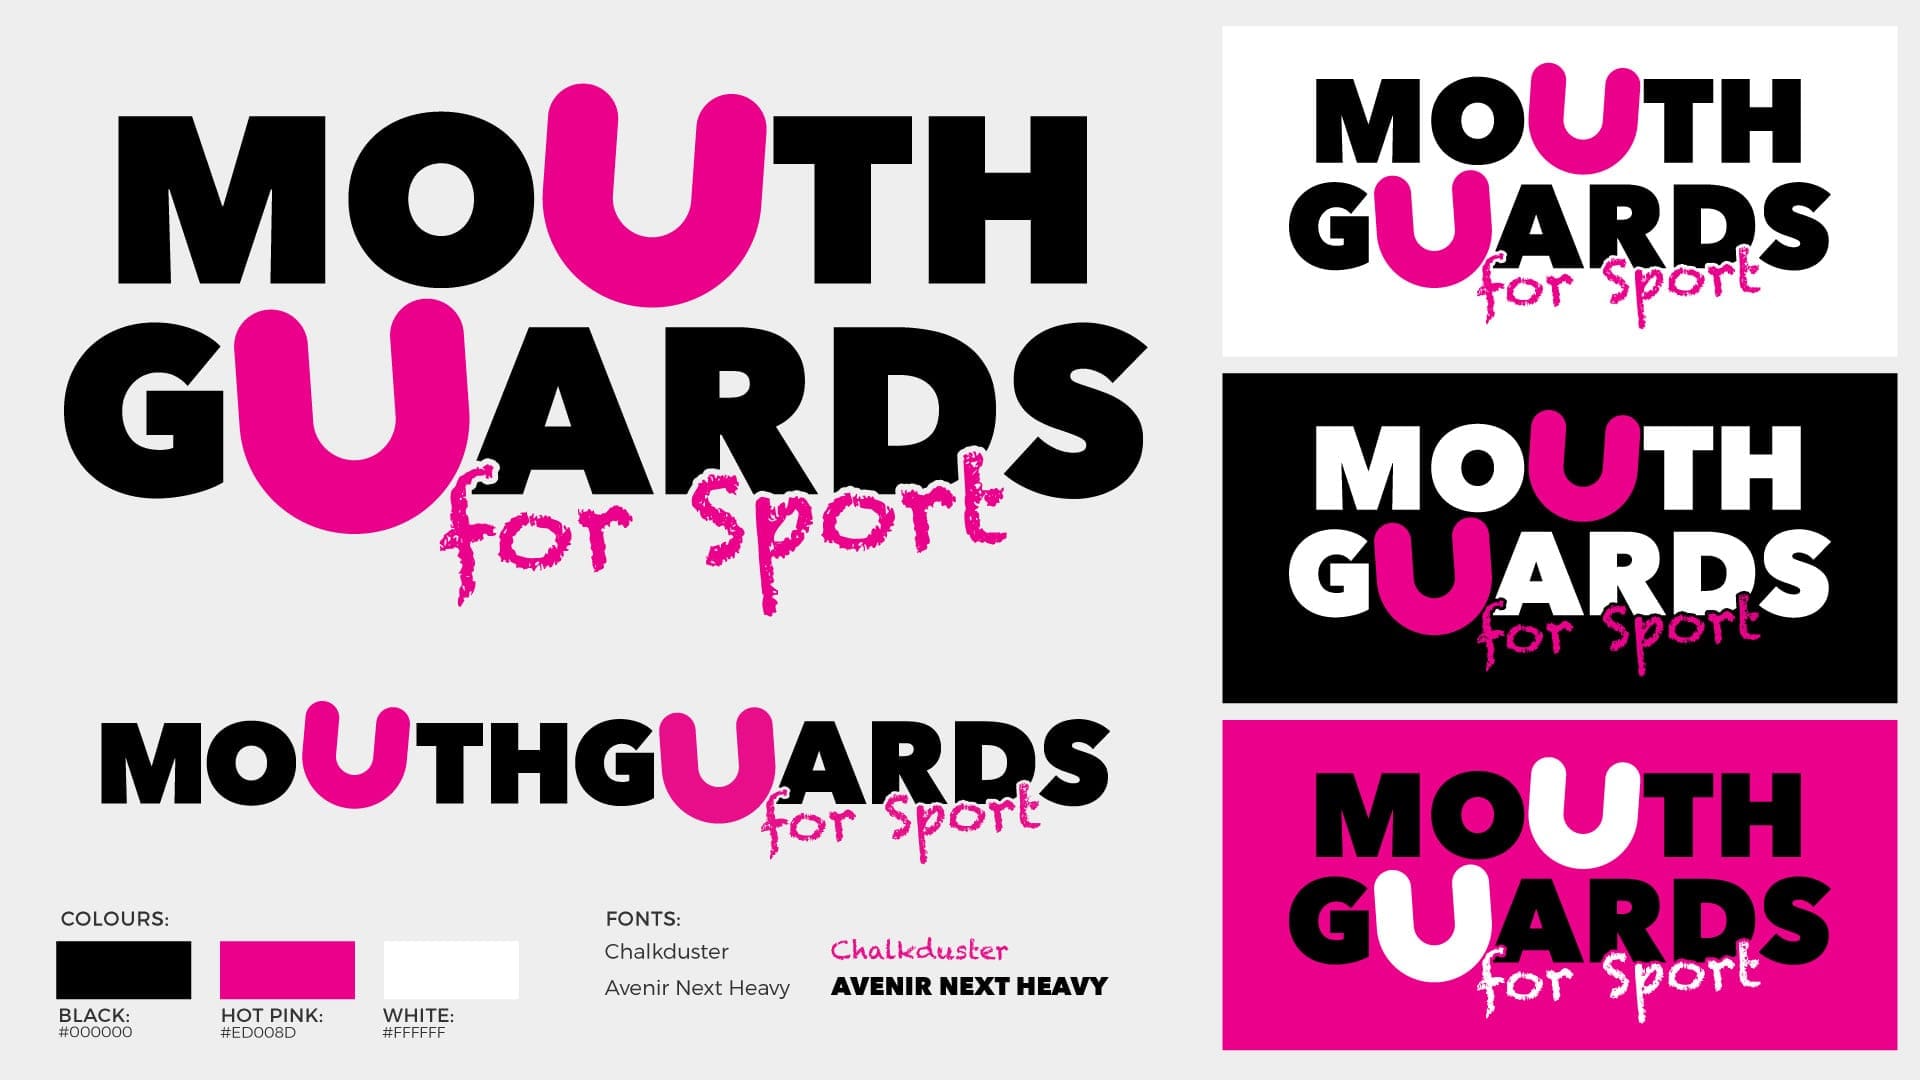 Neil Readhead | Mouthguards for Sport 2